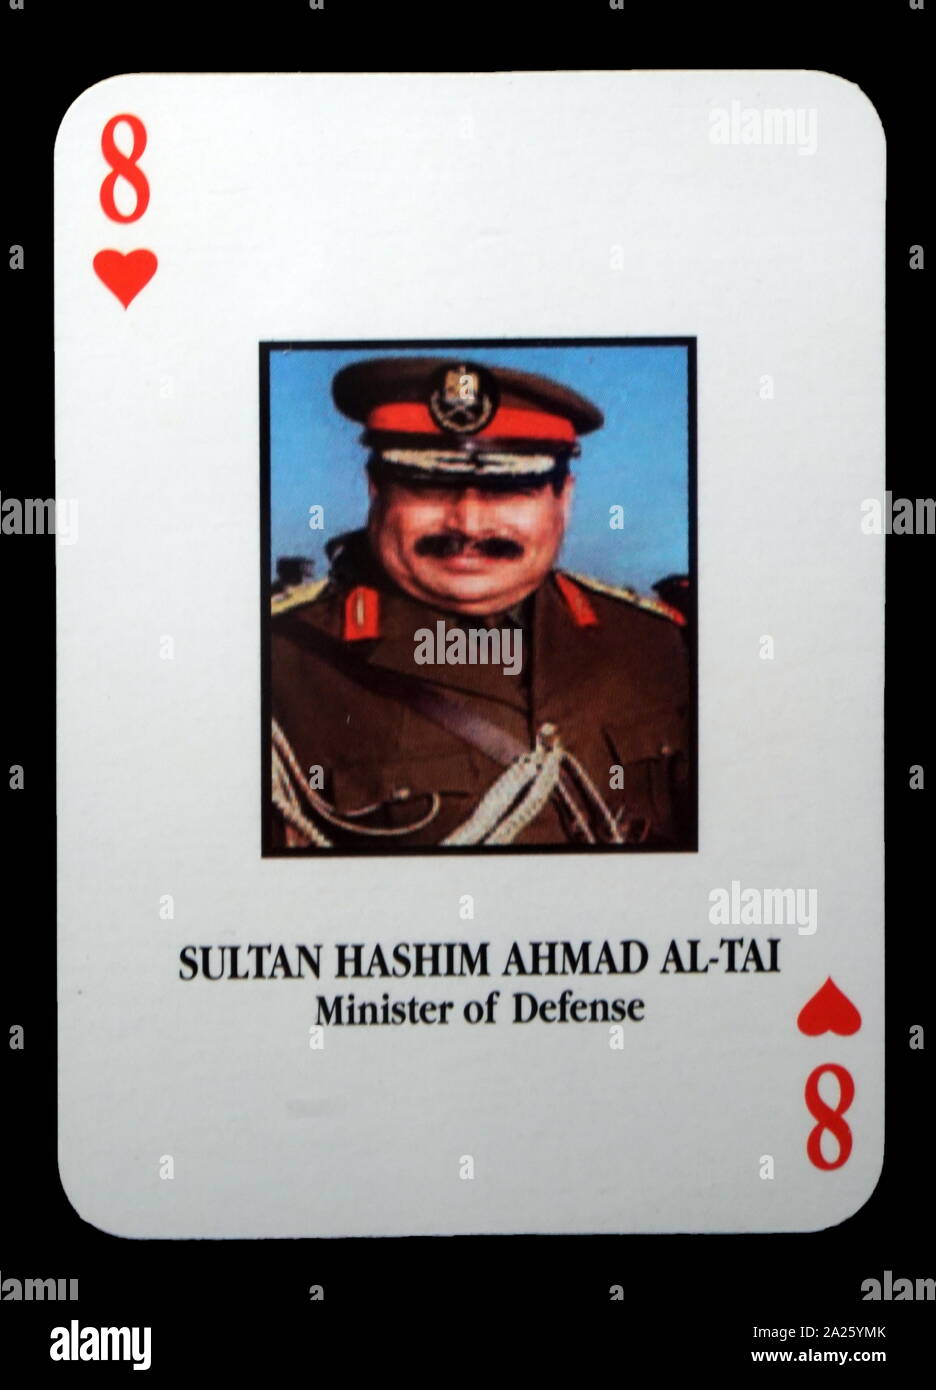 Most-wanted Iraqi playing cards - Sultan Hashim Ahmad Al-Tai (Minister of Defence). The U.S. military developed a set of playing cards to help troop identify the most-wanted members of President Saddam Hussein's government during the 2003 invasion of Iraq. Stock Photo